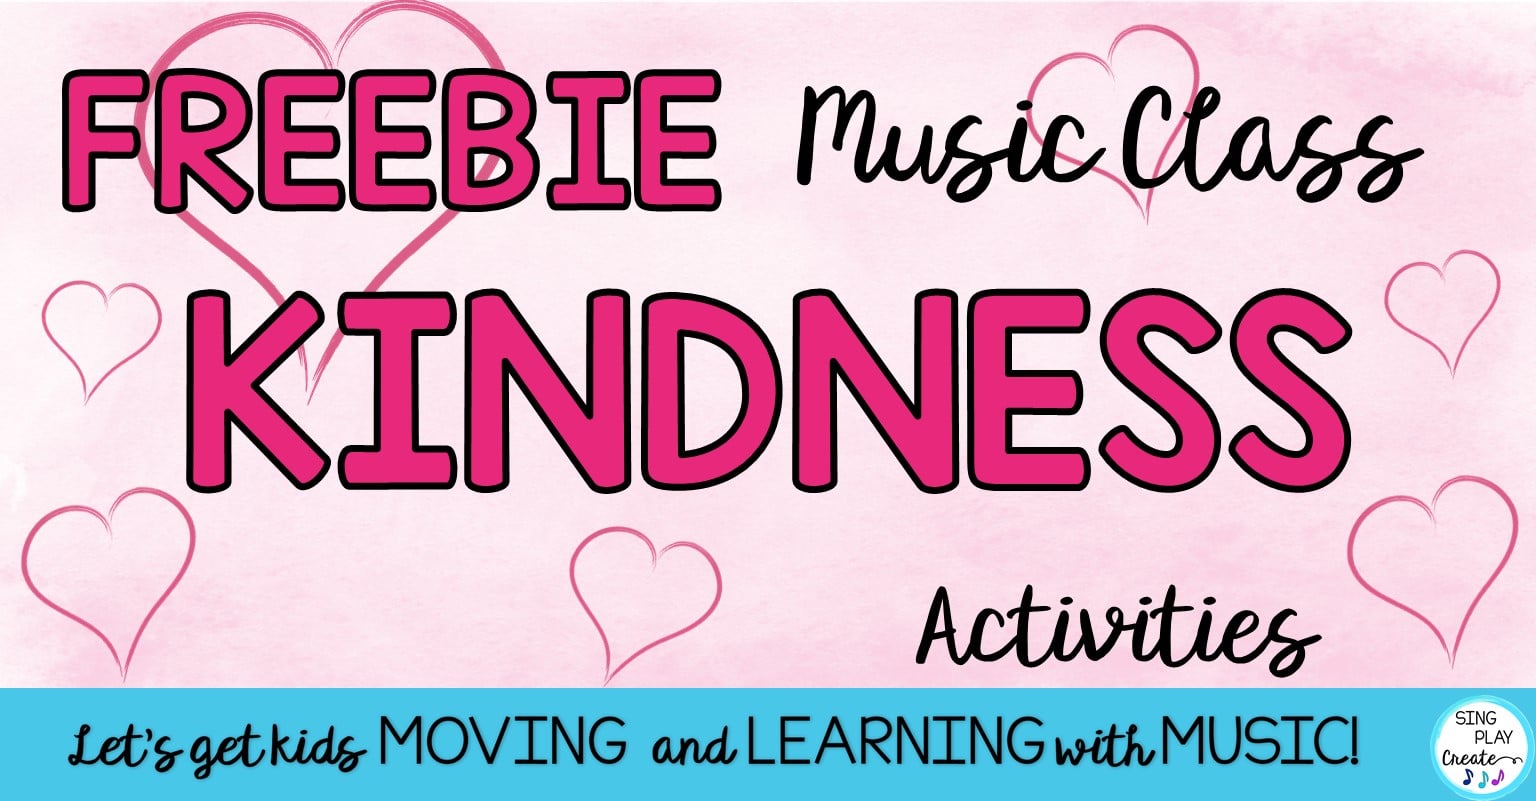 You are currently viewing Free Kindness Music Class Activities